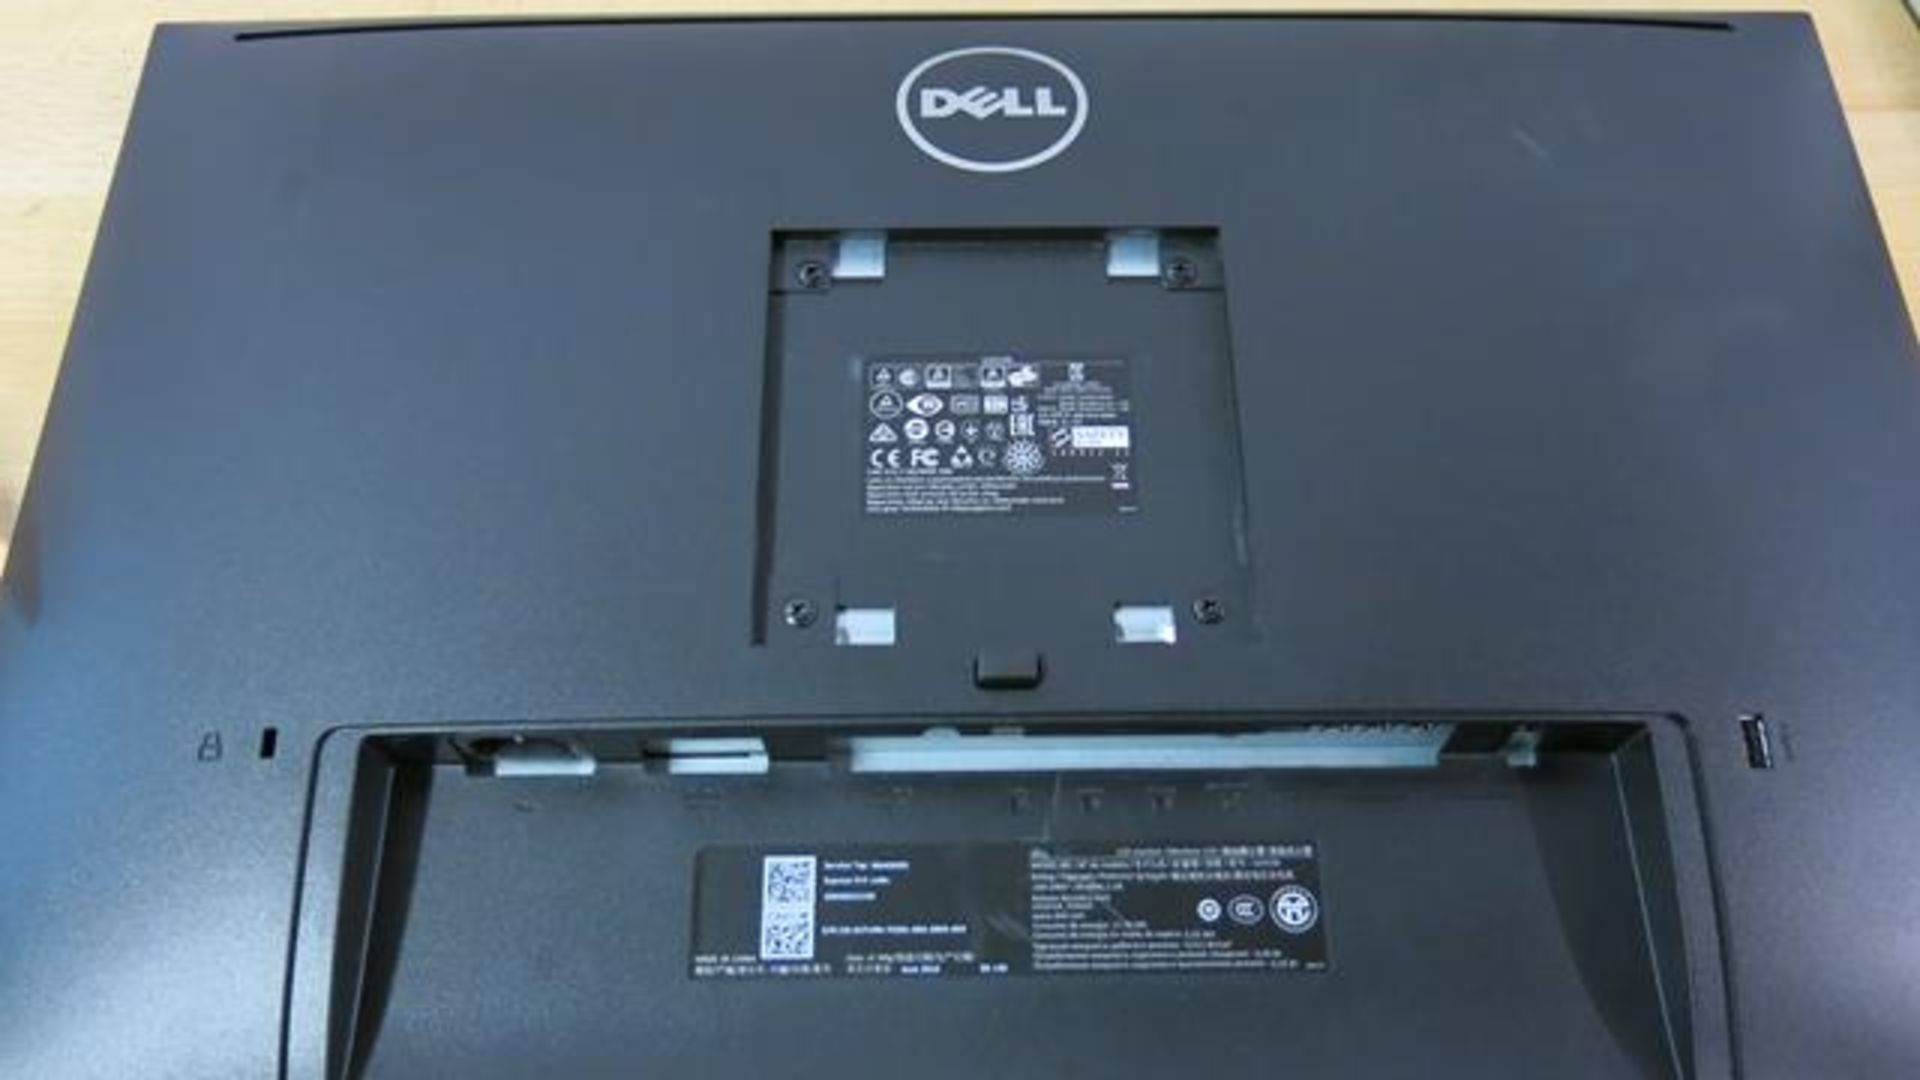 DELL, U2415B, 24", WIDESCREEN COMPUTER MONITOR, S/N CN-0CFV9N-74261-66A-284S-A03, (TAG#203) - Image 2 of 2